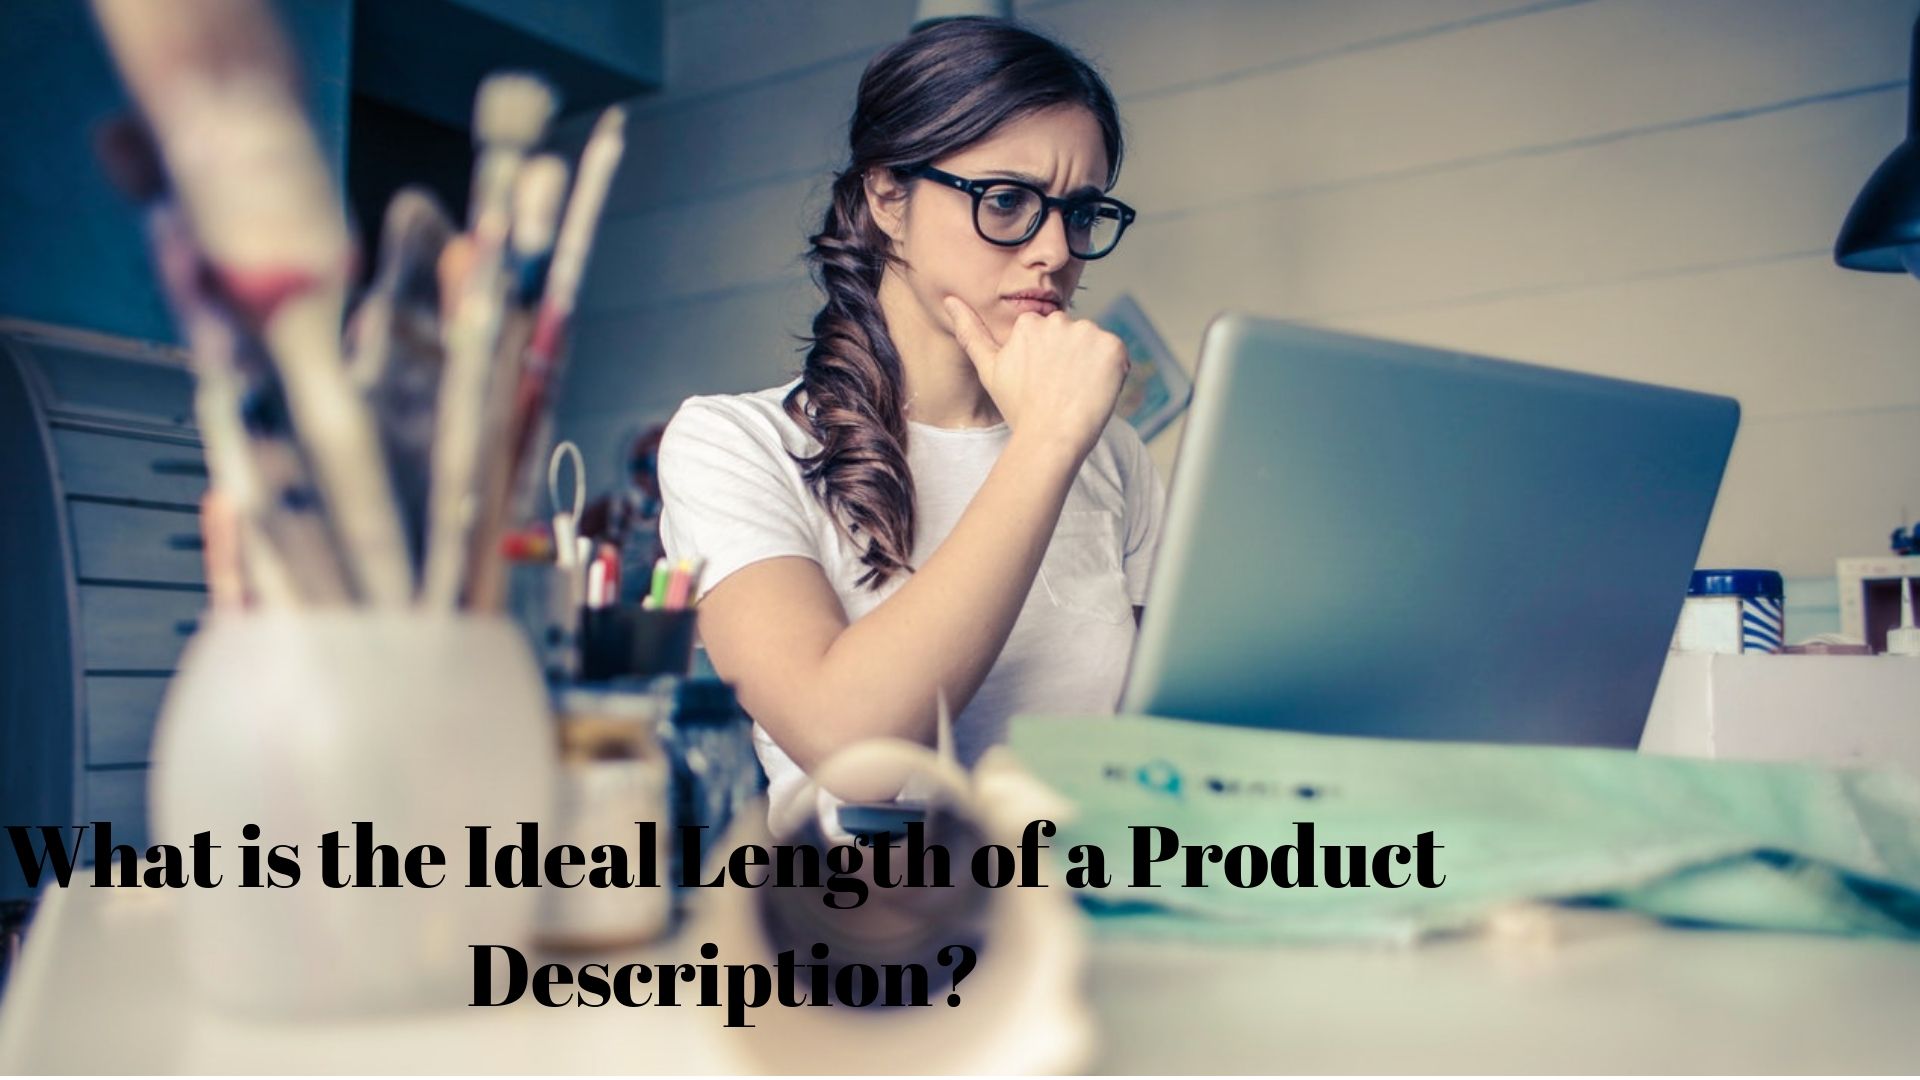 Young woman thinking of ideal length of product description